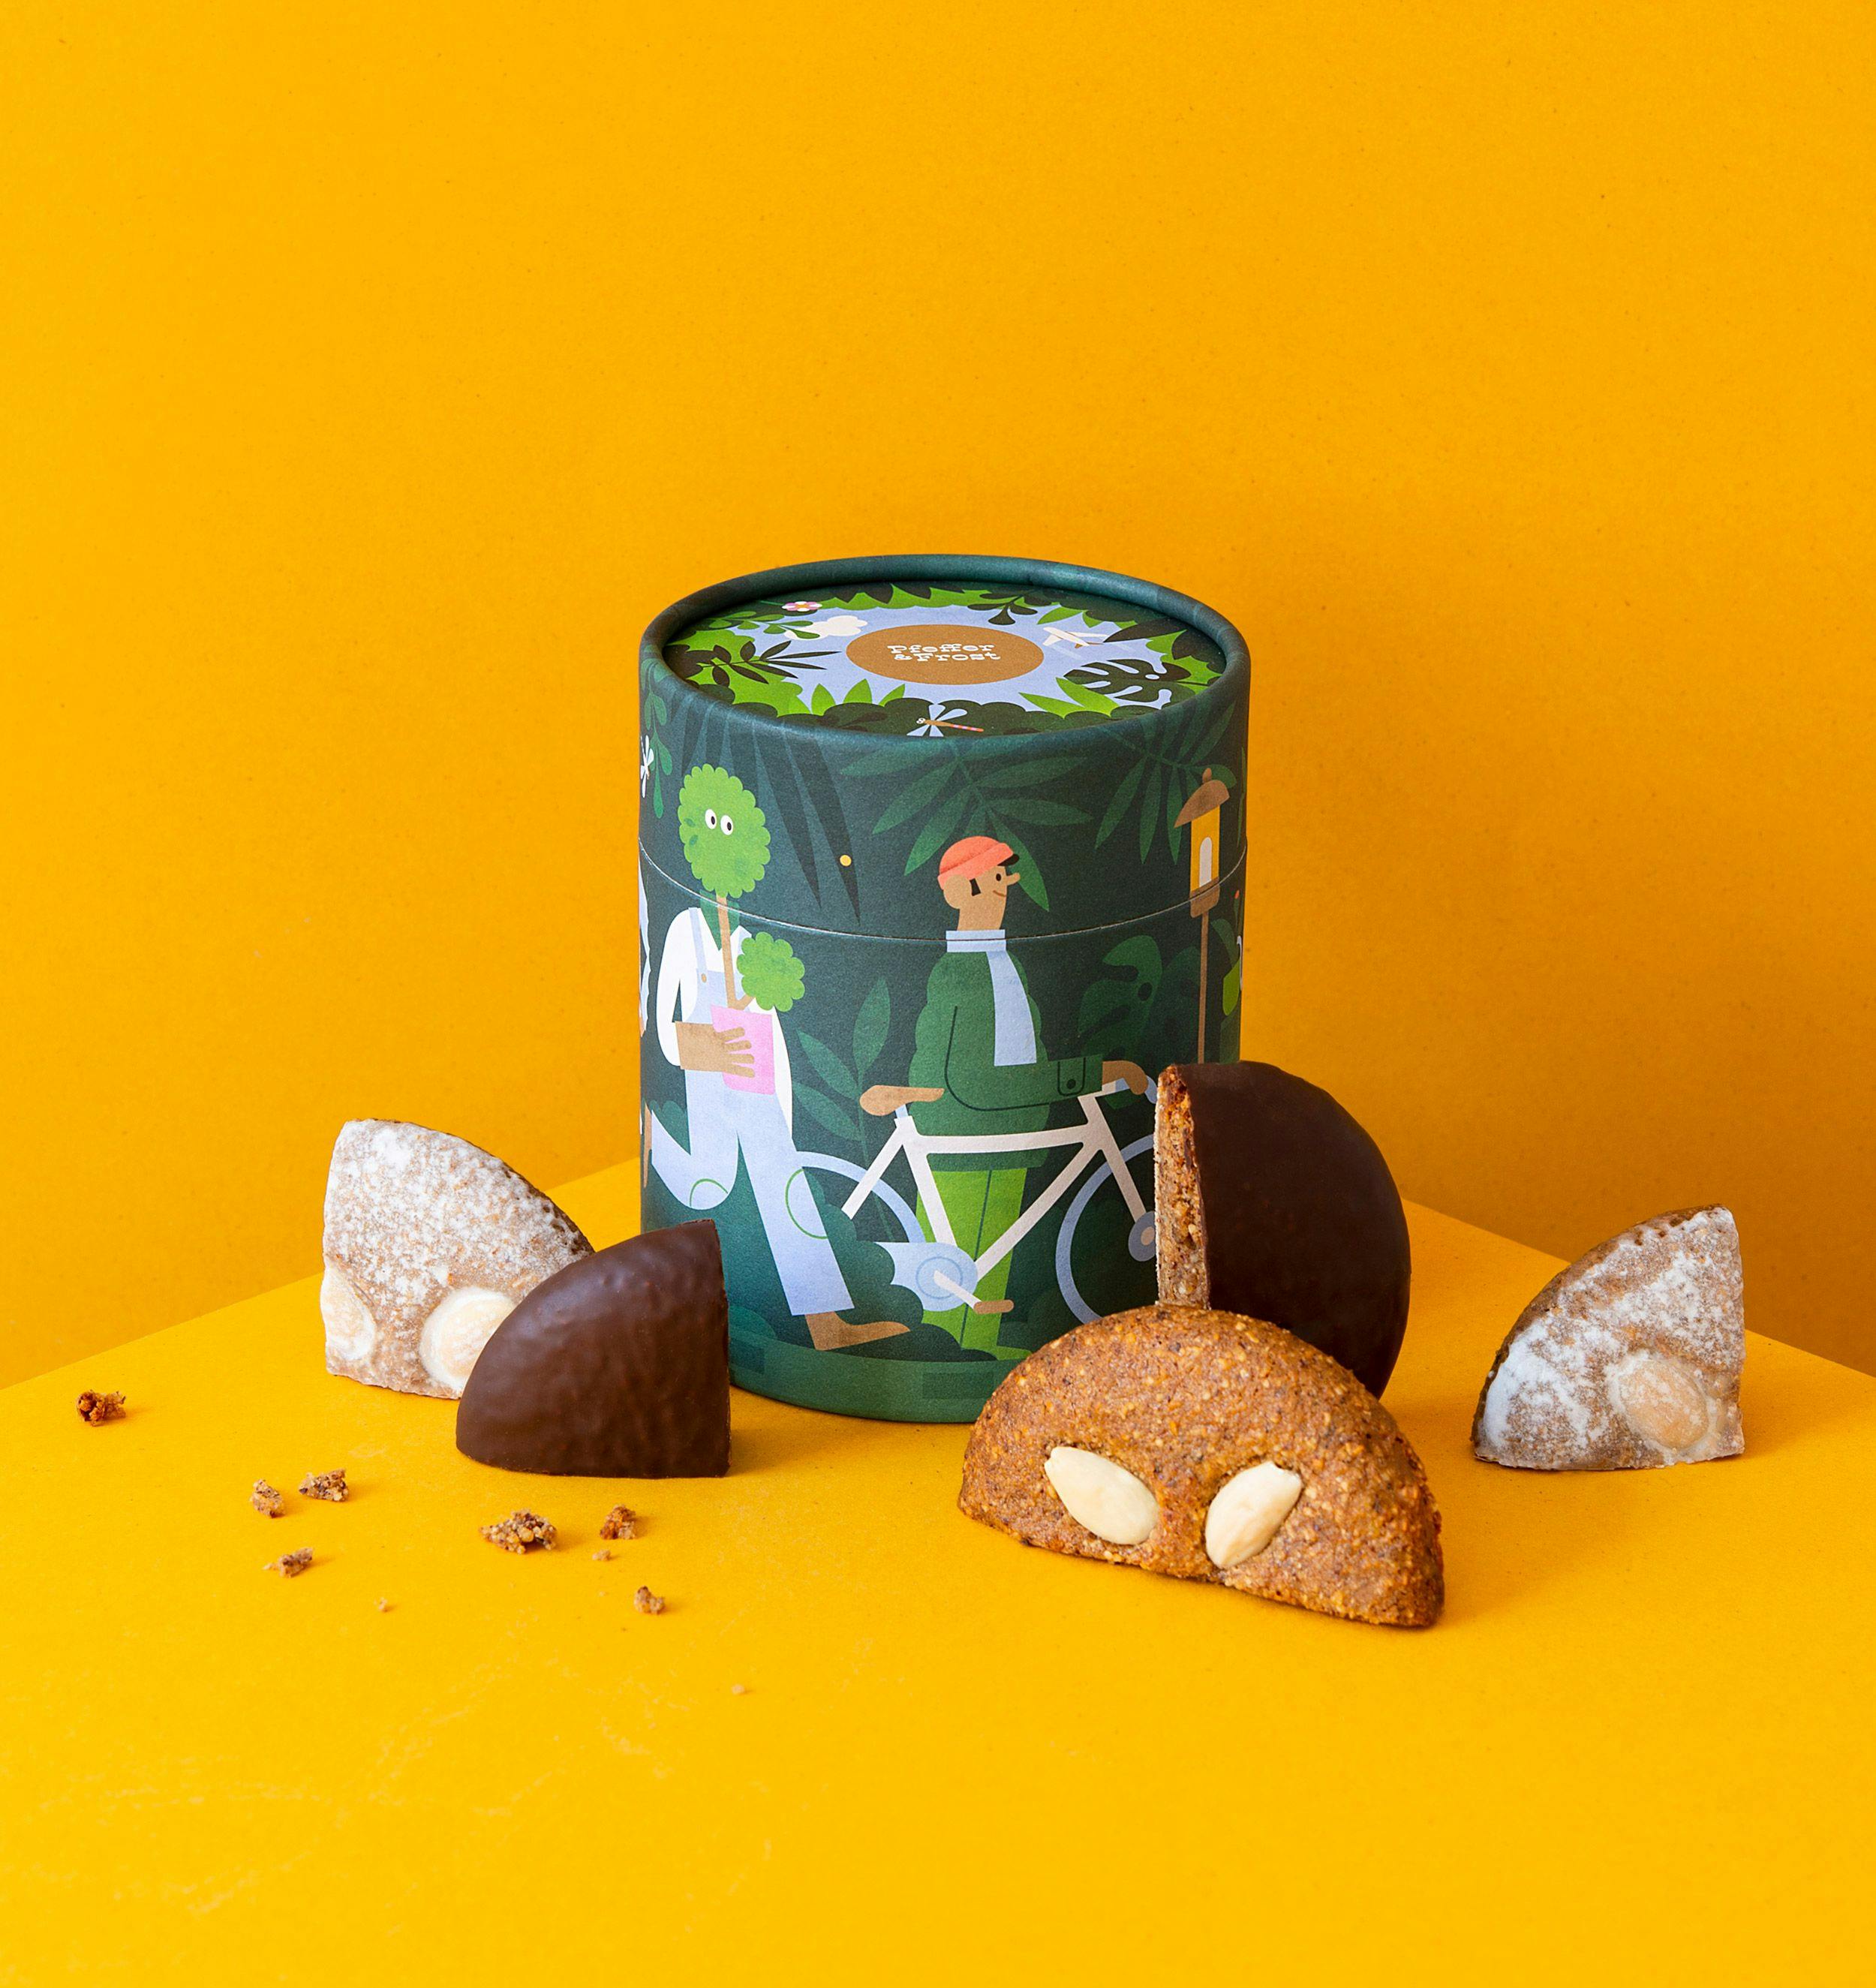 5 Elisen Lebkuchen in illustrated recyclable paper box